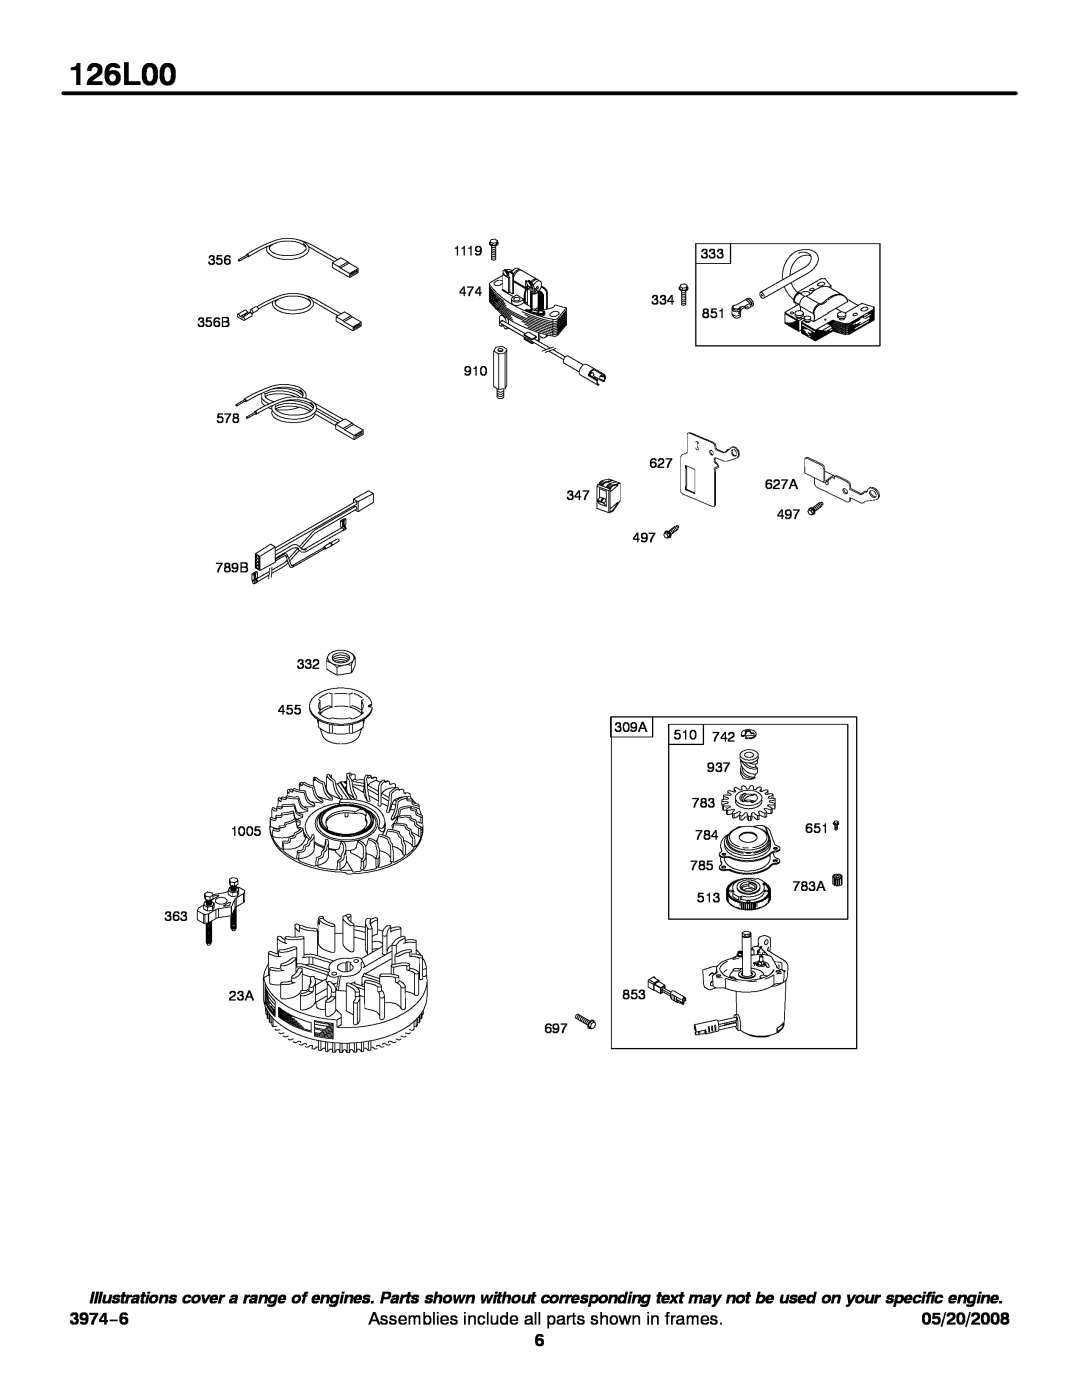 Snapper 126L00 service manual 3974−6, Assemblies include all parts shown in frames, 05/20/2008 